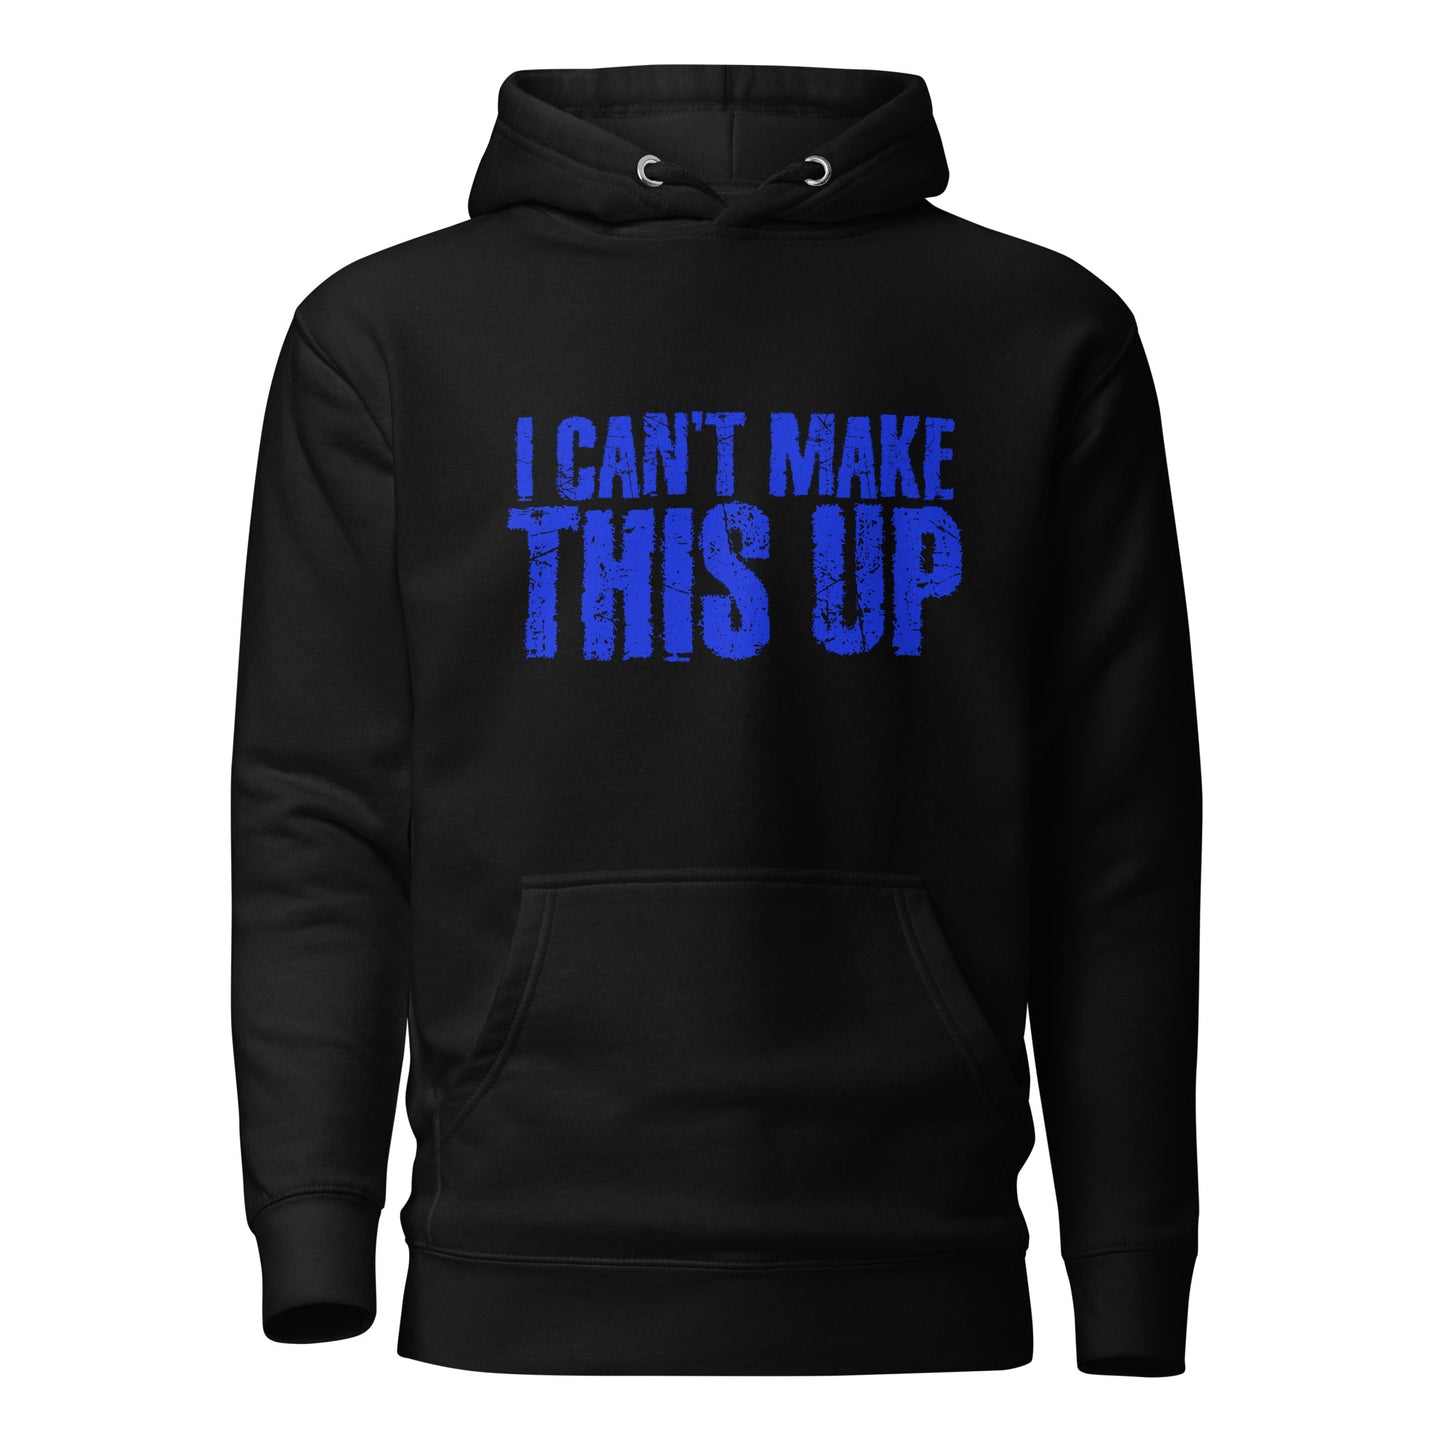 Black, Camo Colors with Blue Unisex Hoodie - I Cant Make This Up